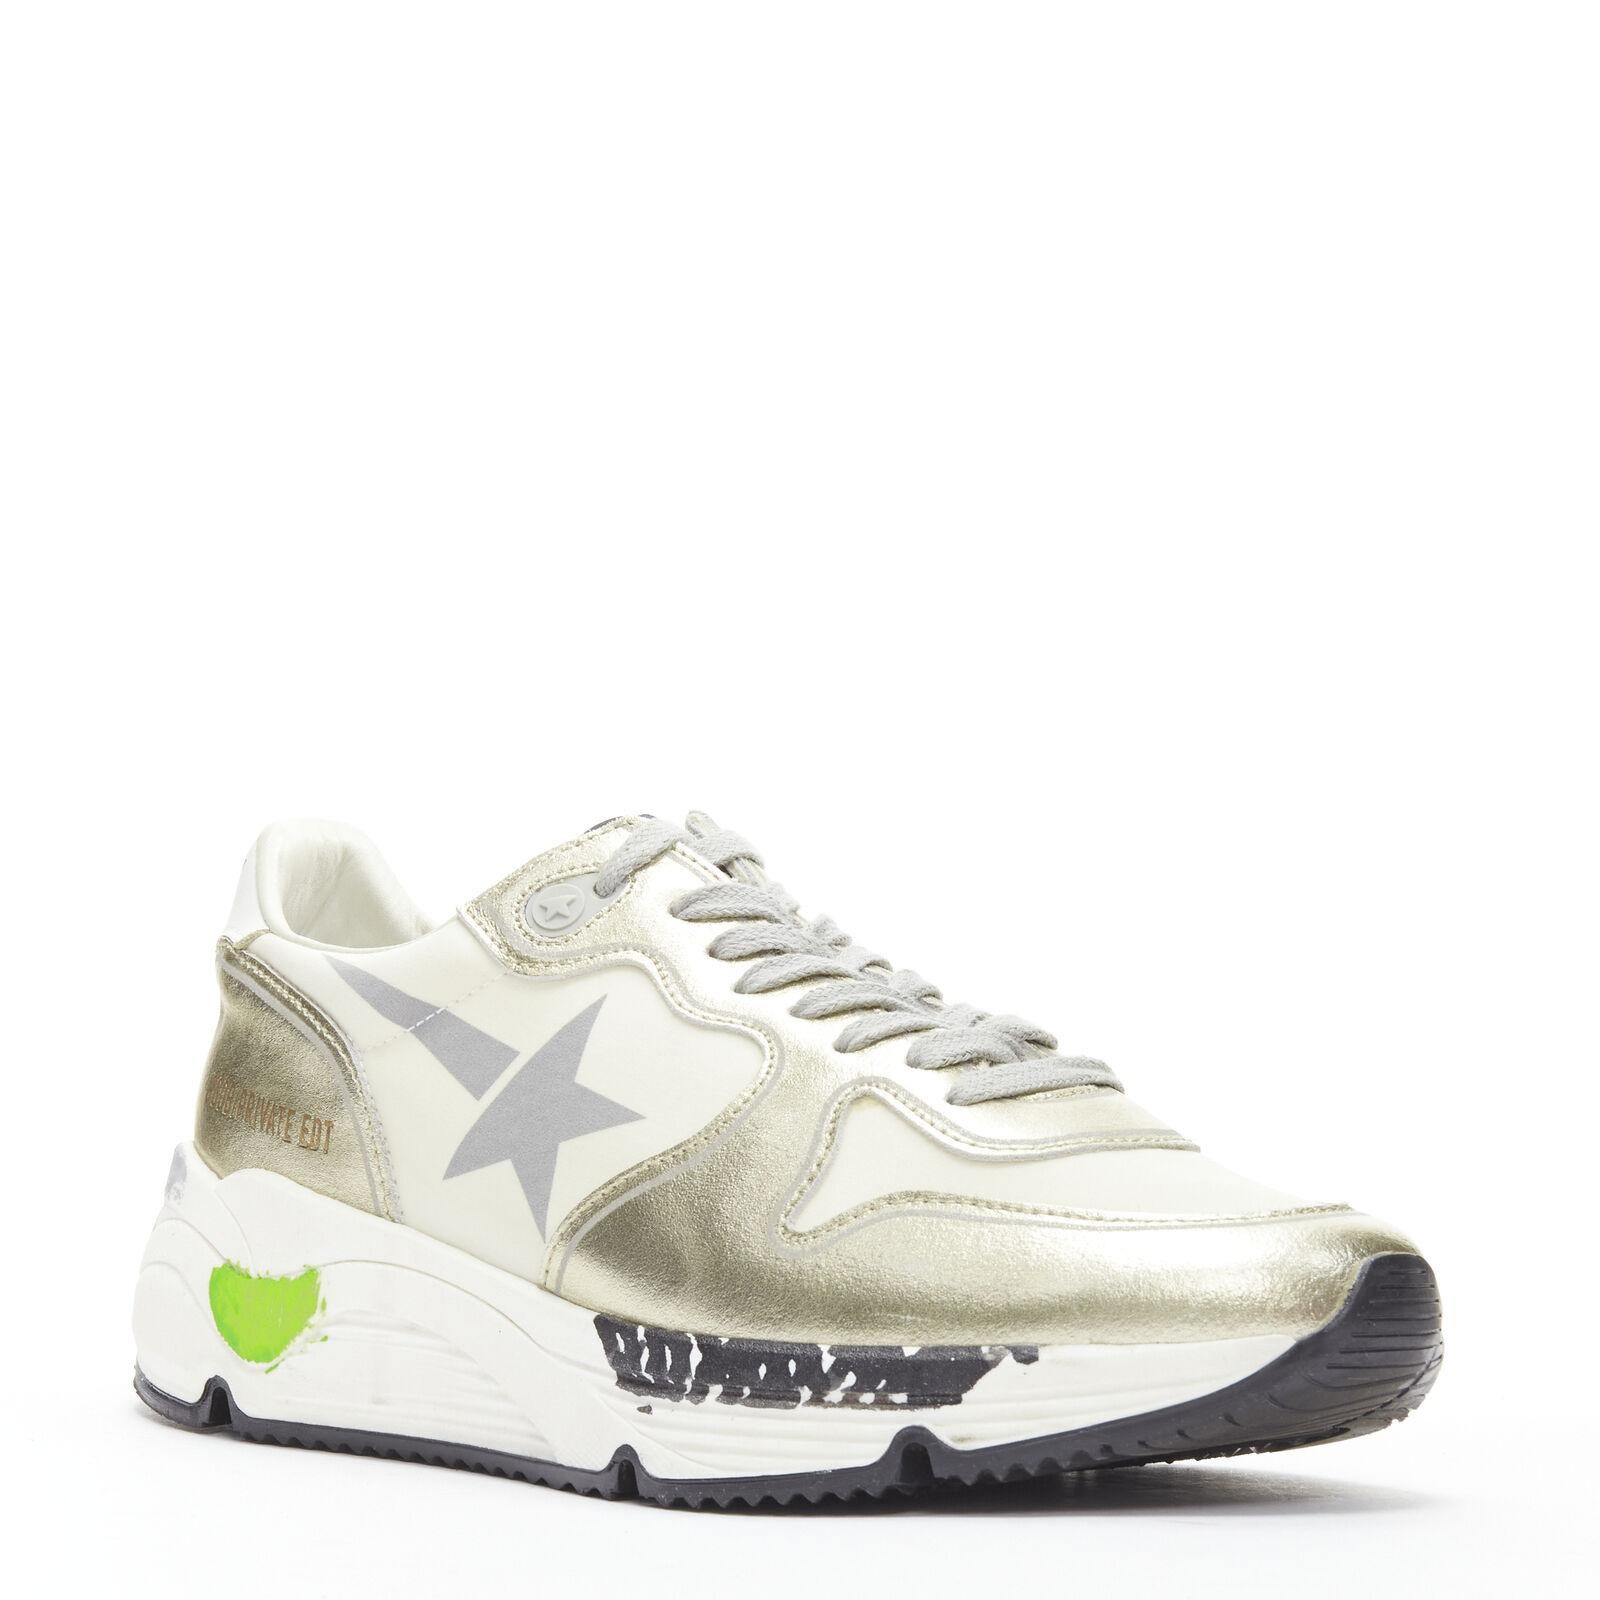 GOLDEN GOOSE Private EDT Running chunky metallic gold distressed sneaker EU38
Reference: AAWC/A00139
Brand: Golden Goose
Model: Running Private EDT
Material: Leather, Fabric
Color: Gold, Beige
Pattern: Solid
Closure: Lace Up
Lining: Fabric
Extra